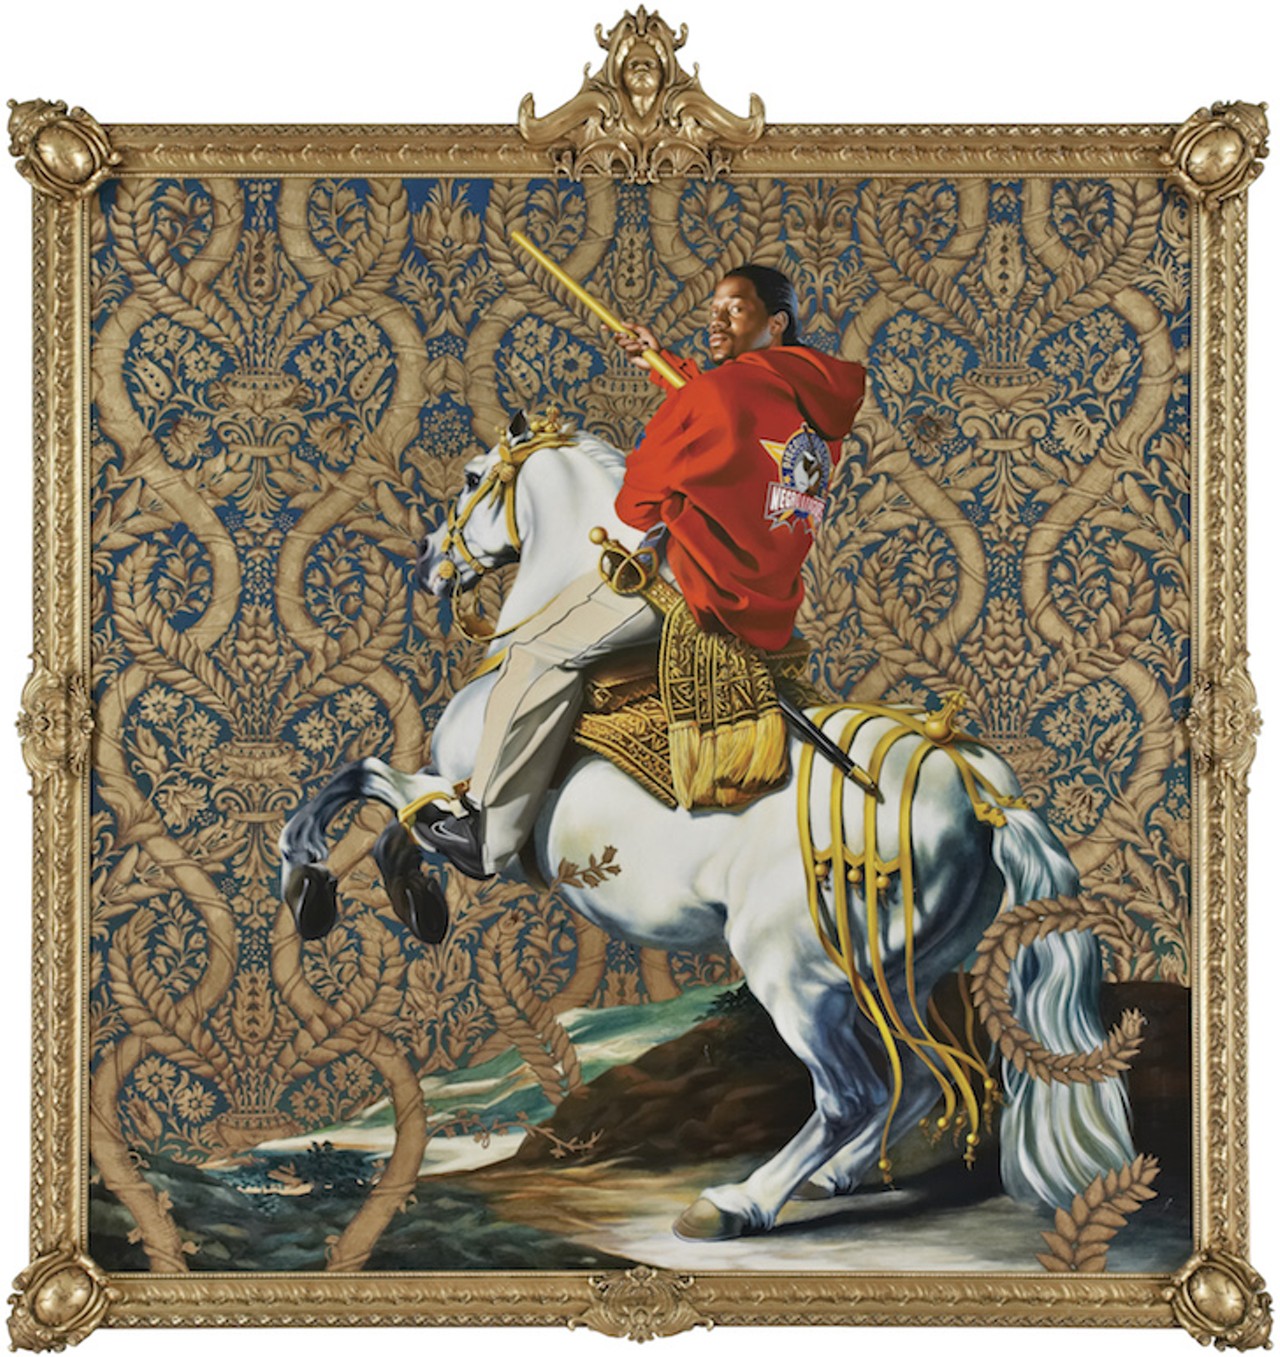 Kehinde Wiley, Equestrian Portrait of the Count-Duke Olivares, 2005. Oil on canvas.